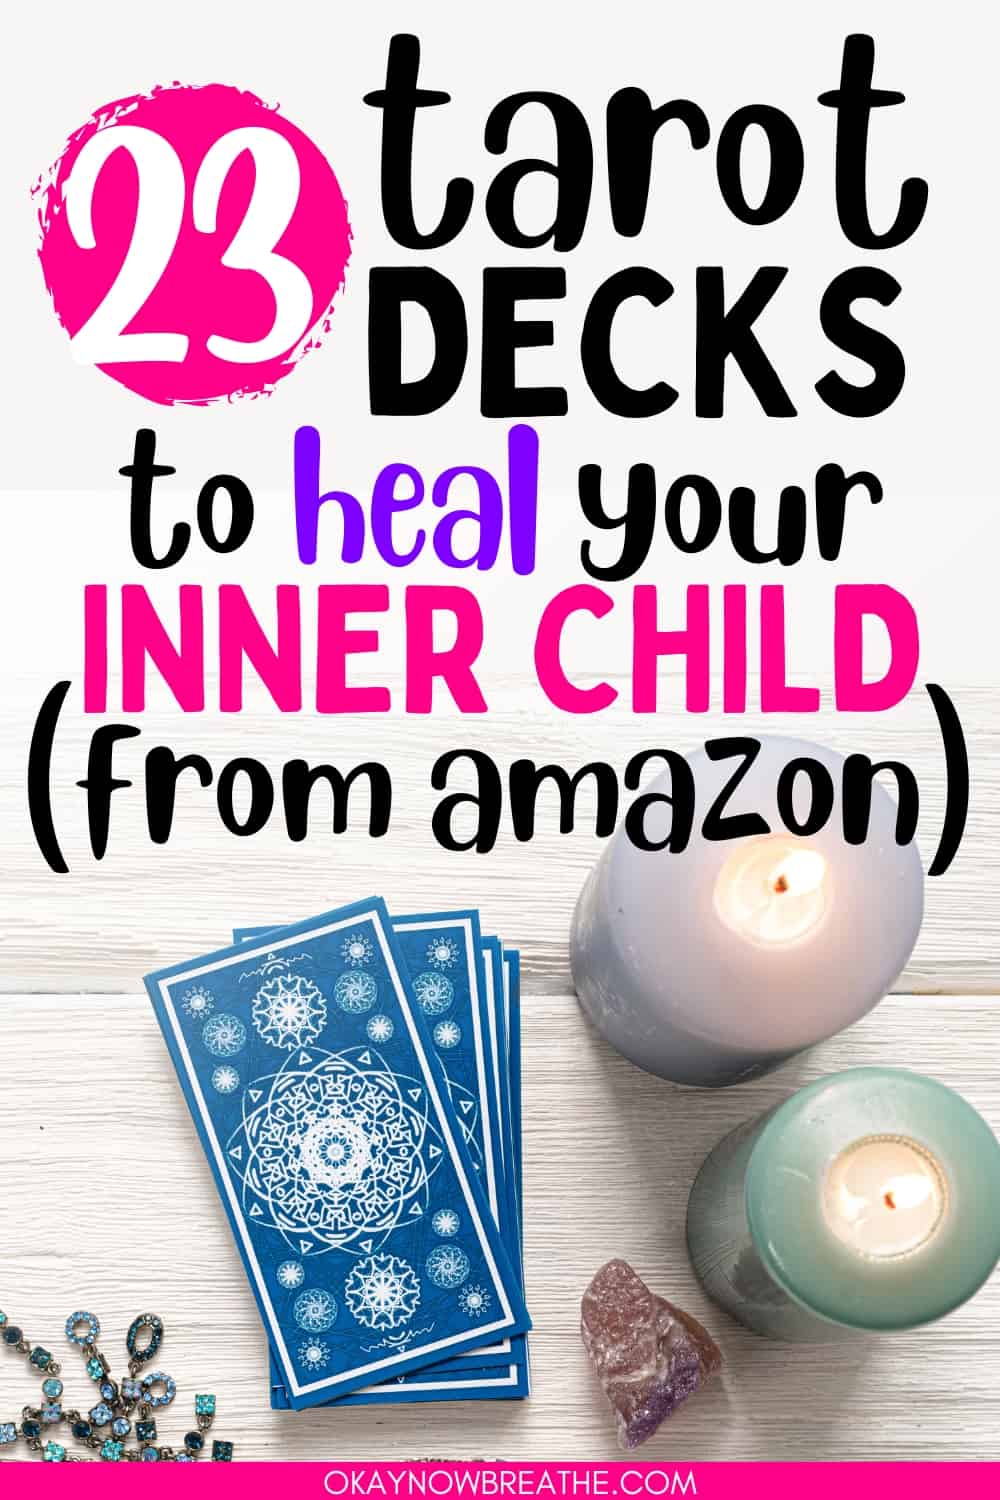 There are two lit candles and a crystal on the right. Next to them on the left, there are tarot cards faced down. There is text overlay on this image that says: 23 tarot decks to heal your inner child (from amazon) - okaynowbreathe.com